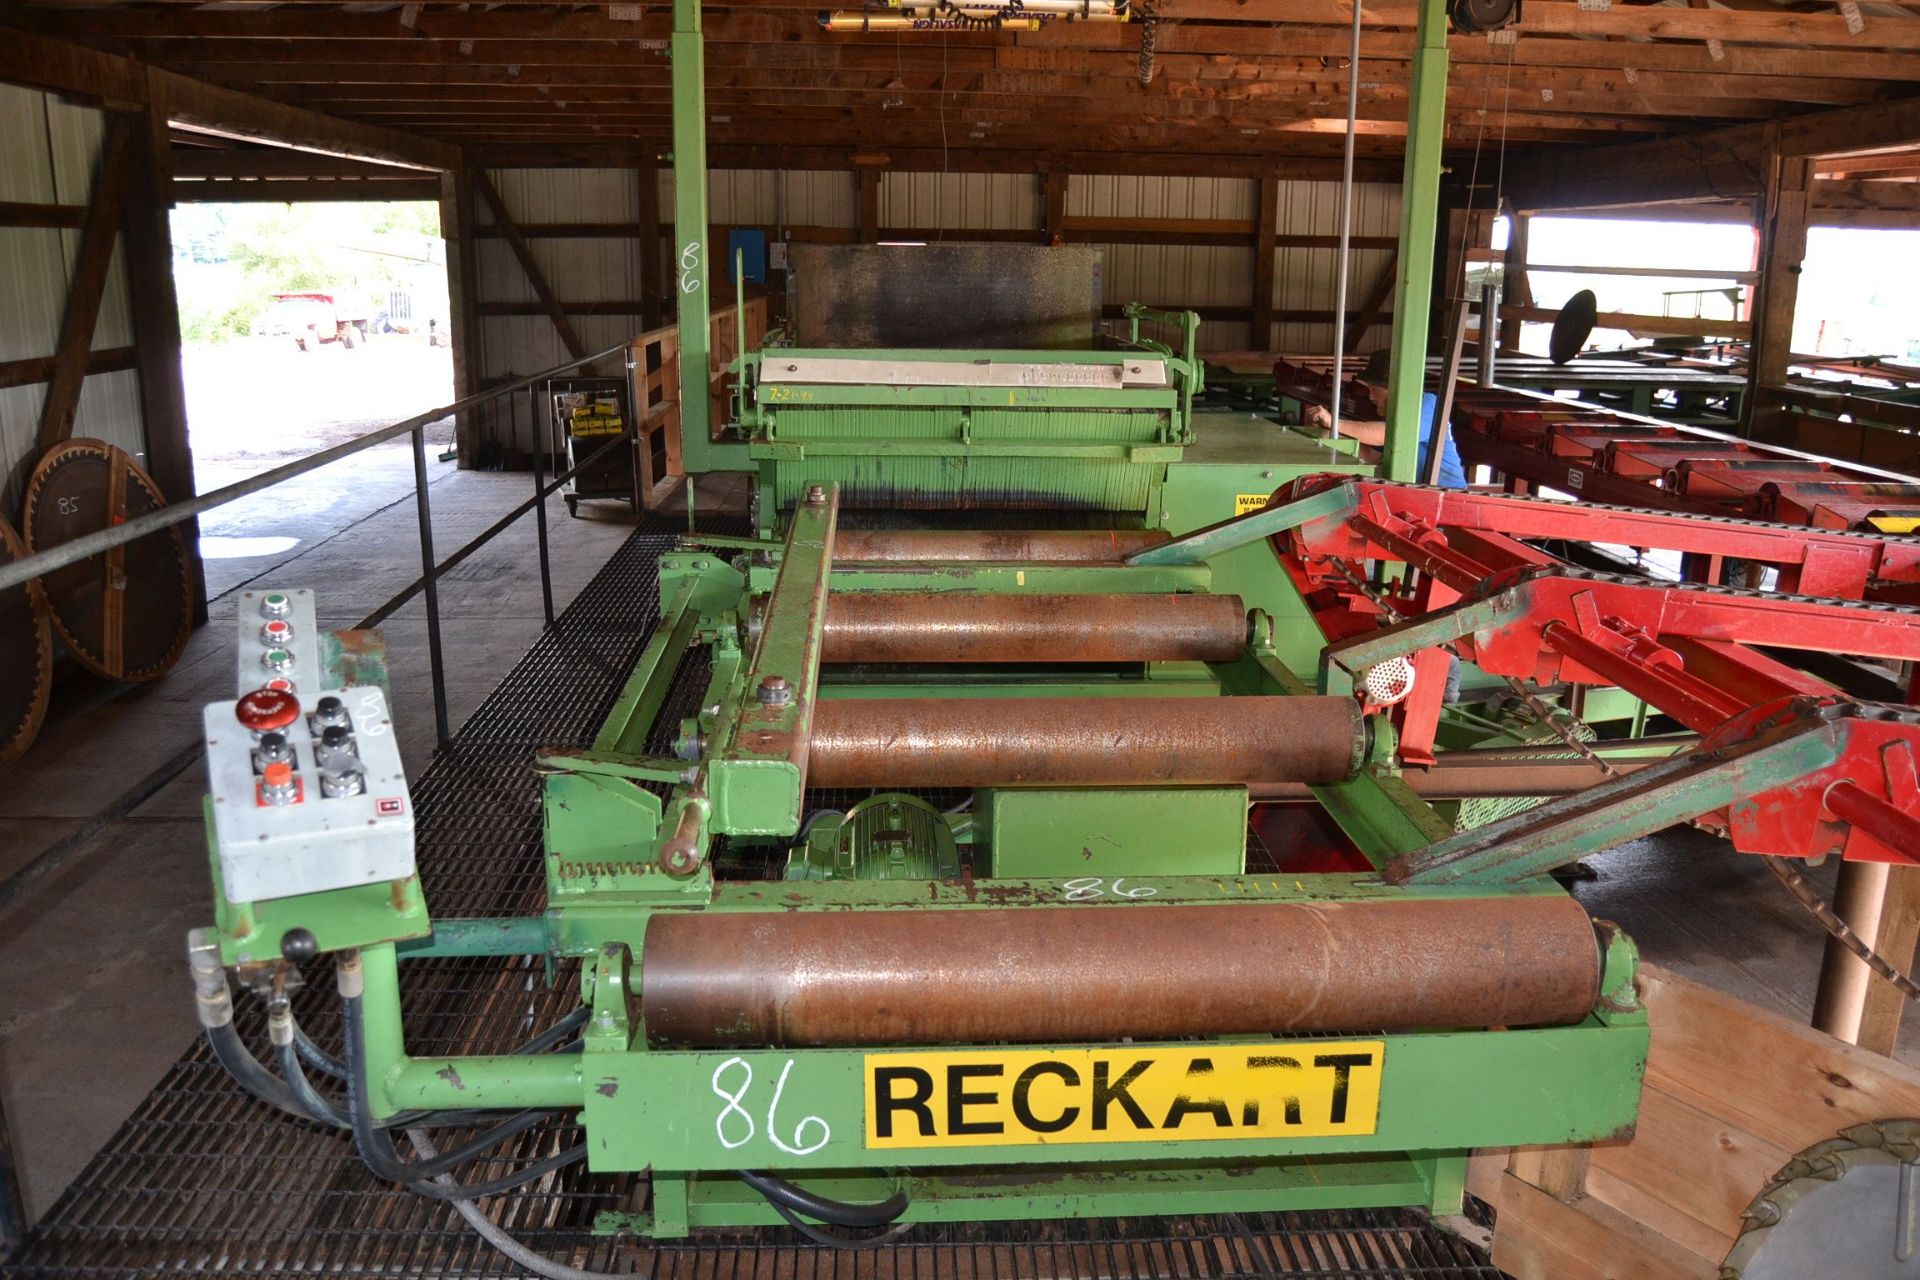 RECKART R 642 EDGER W/ 2 MOVABLE SAWS W/ INFEED ROLLS W/ FENCE W/ OUTFEED DUAL BELT TAILING SYSTEM